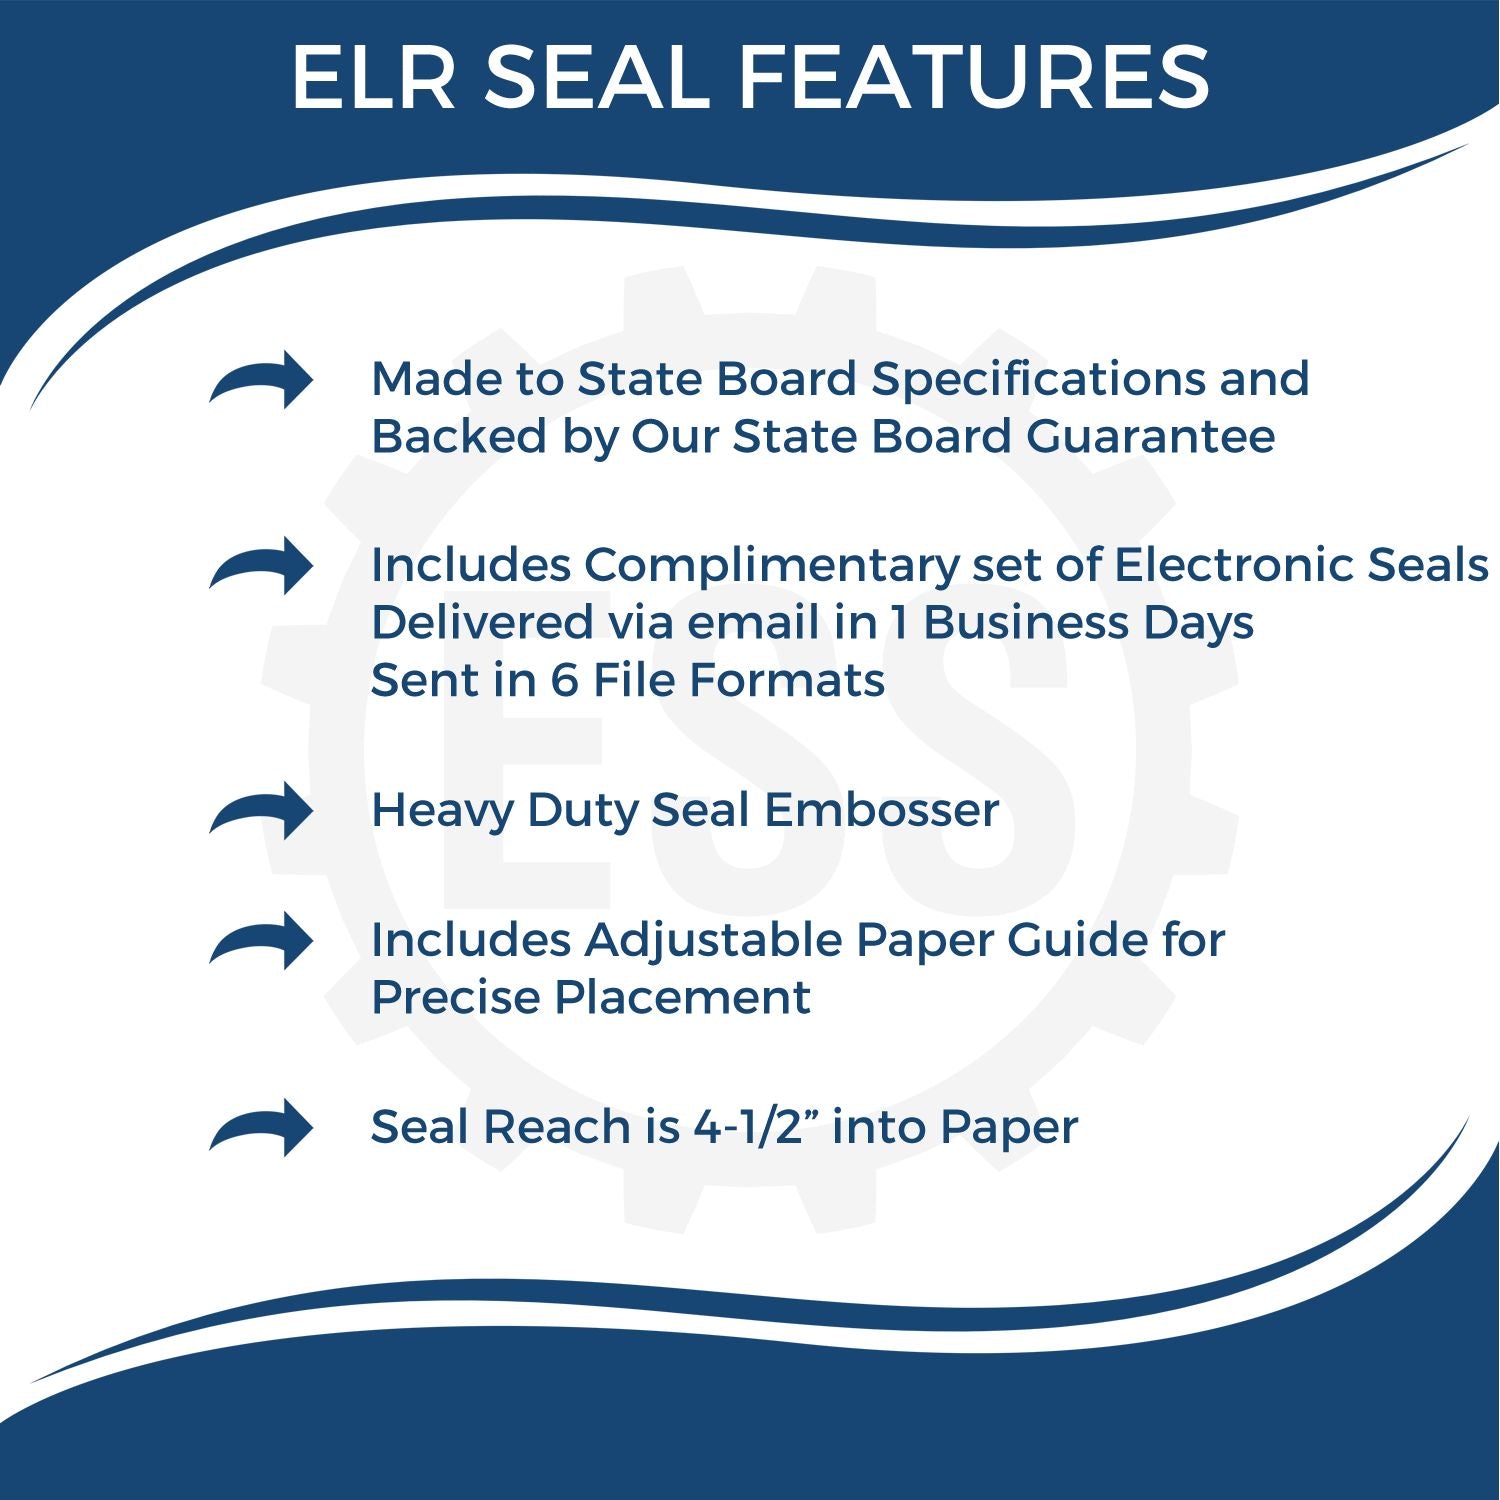 The main image for the State of Missouri Extended Long Reach Engineer Seal depicting a sample of the imprint and electronic files